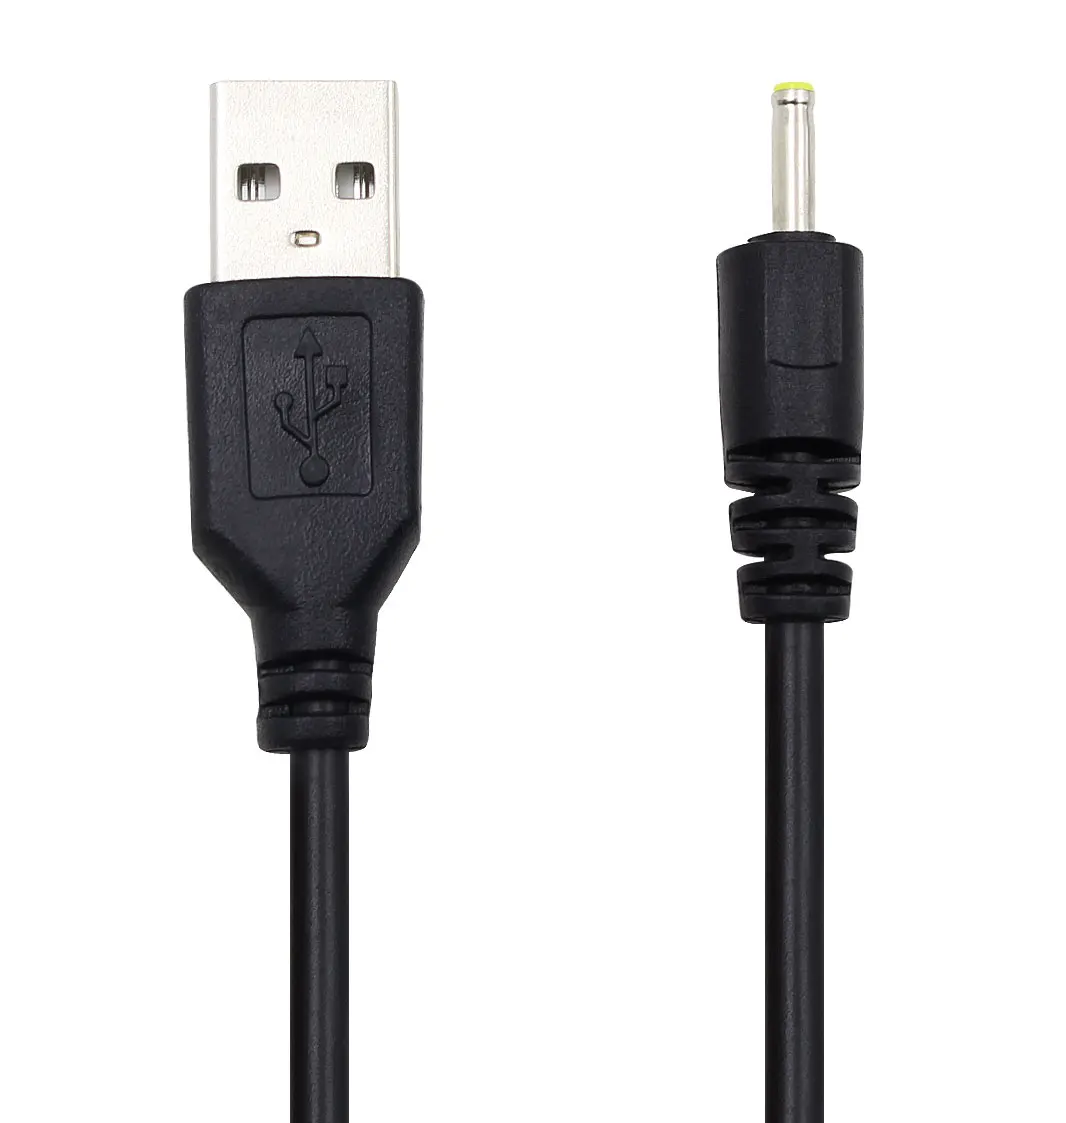 Retractable Cable by BoxWave - AllCharge miniSync Portable USB Cable for LG Access Jet Black Cable for LG Access 